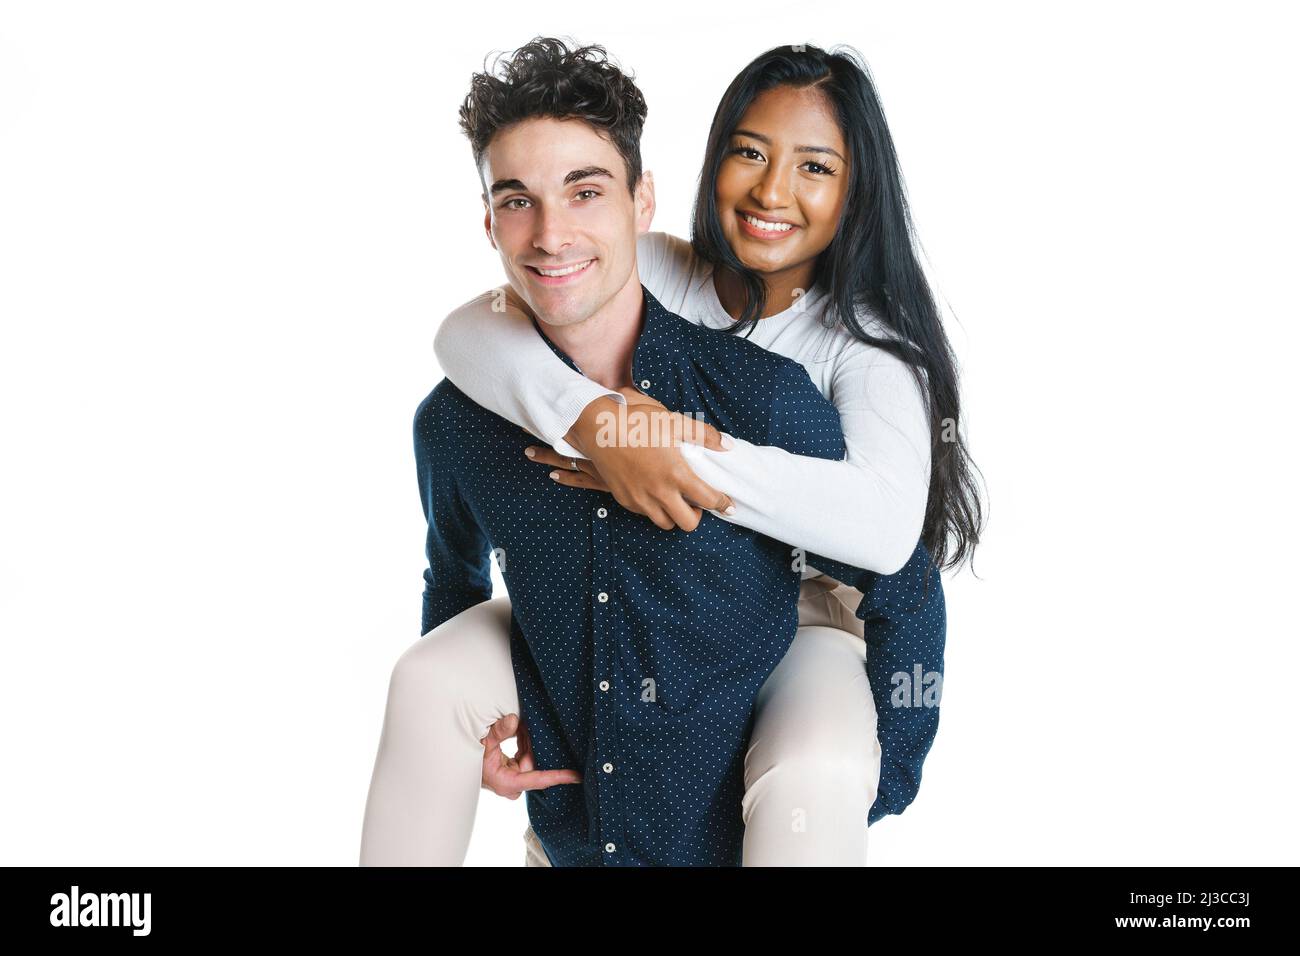 Portrait of Happy Couple Posing Together Standing with Arms Crossed Stock  Image - Image of adult, fashionable: 102698821